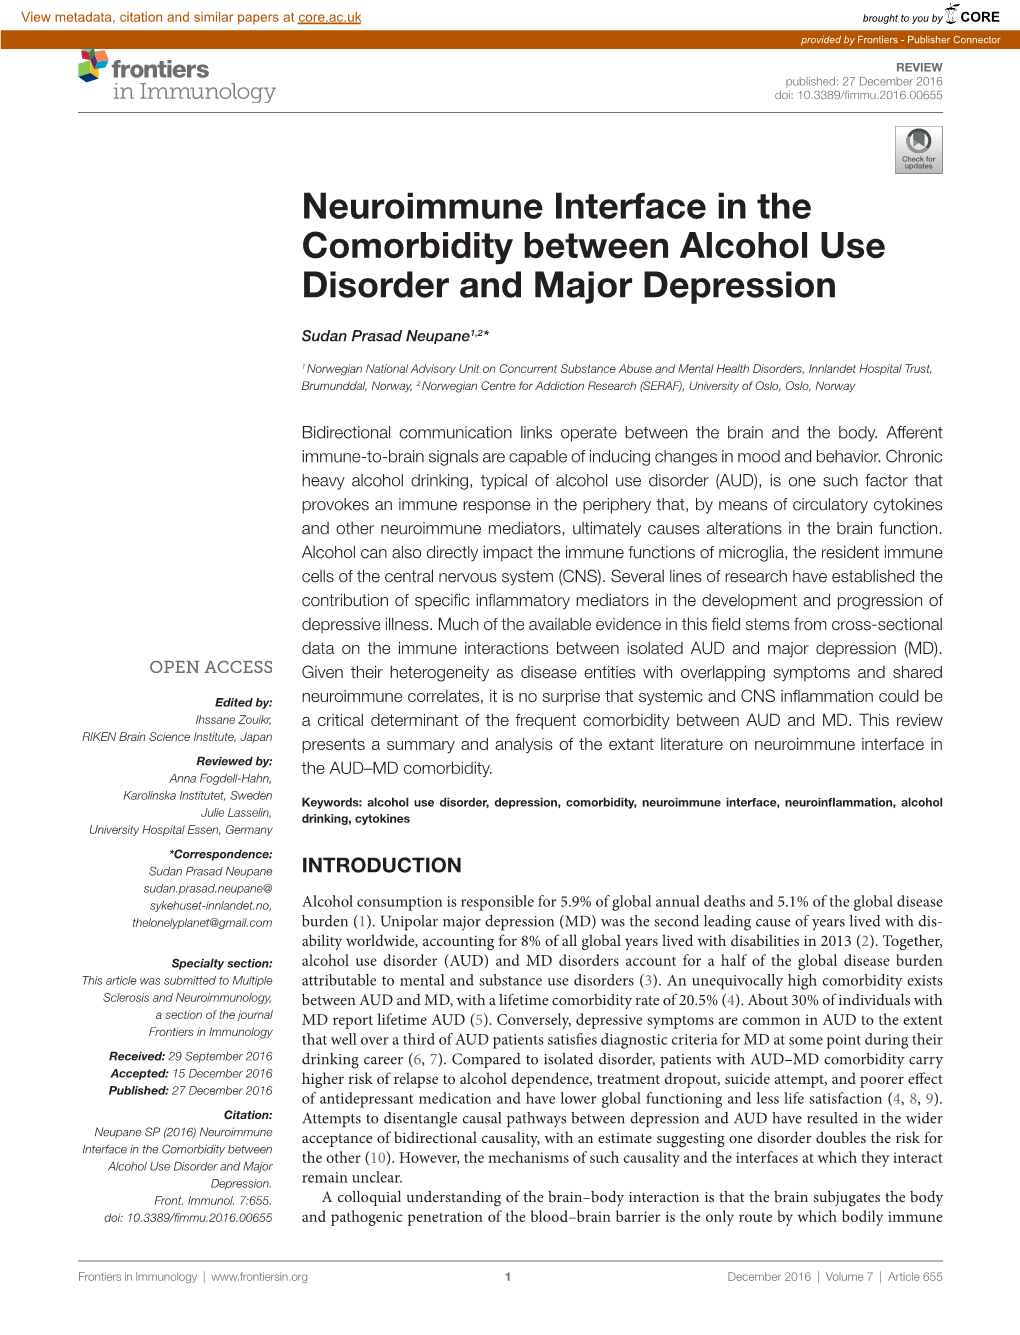 Neuroimmune Interface in the Comorbidity Between Alcohol Use Disorder and Major Depression